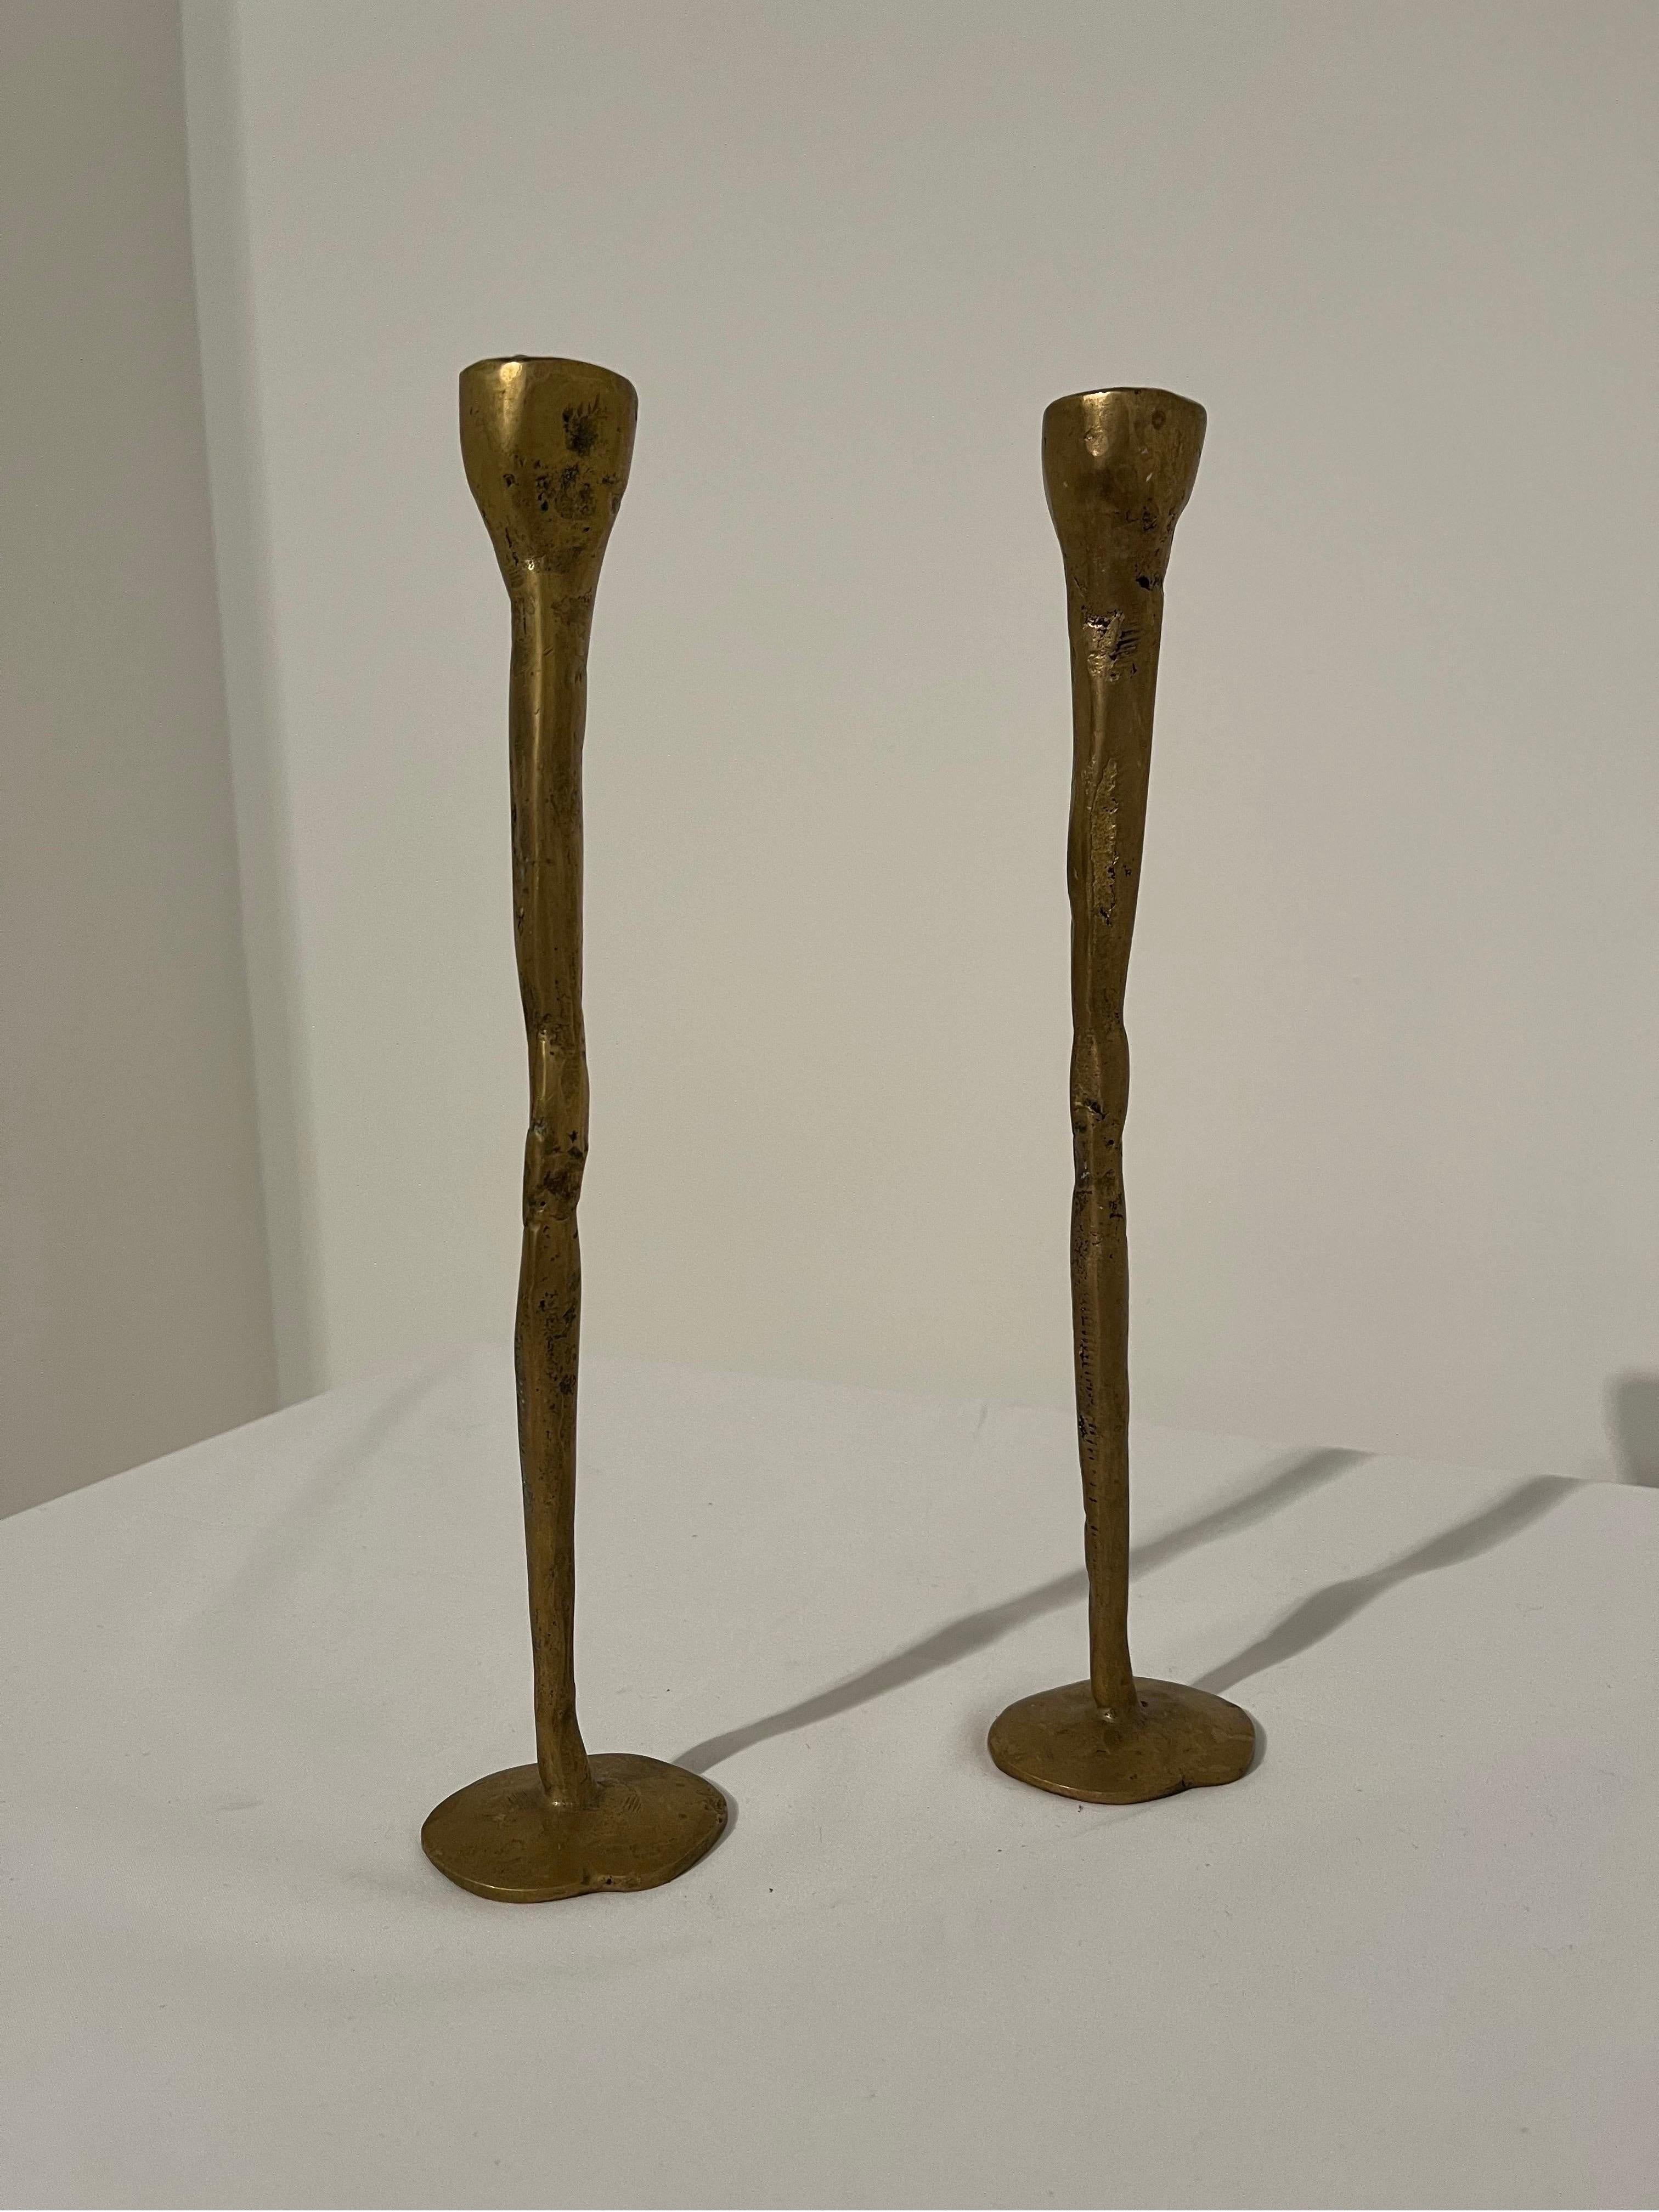 Stylish Cast Brass Candlesticks in the manner of Daivid Marshall. 